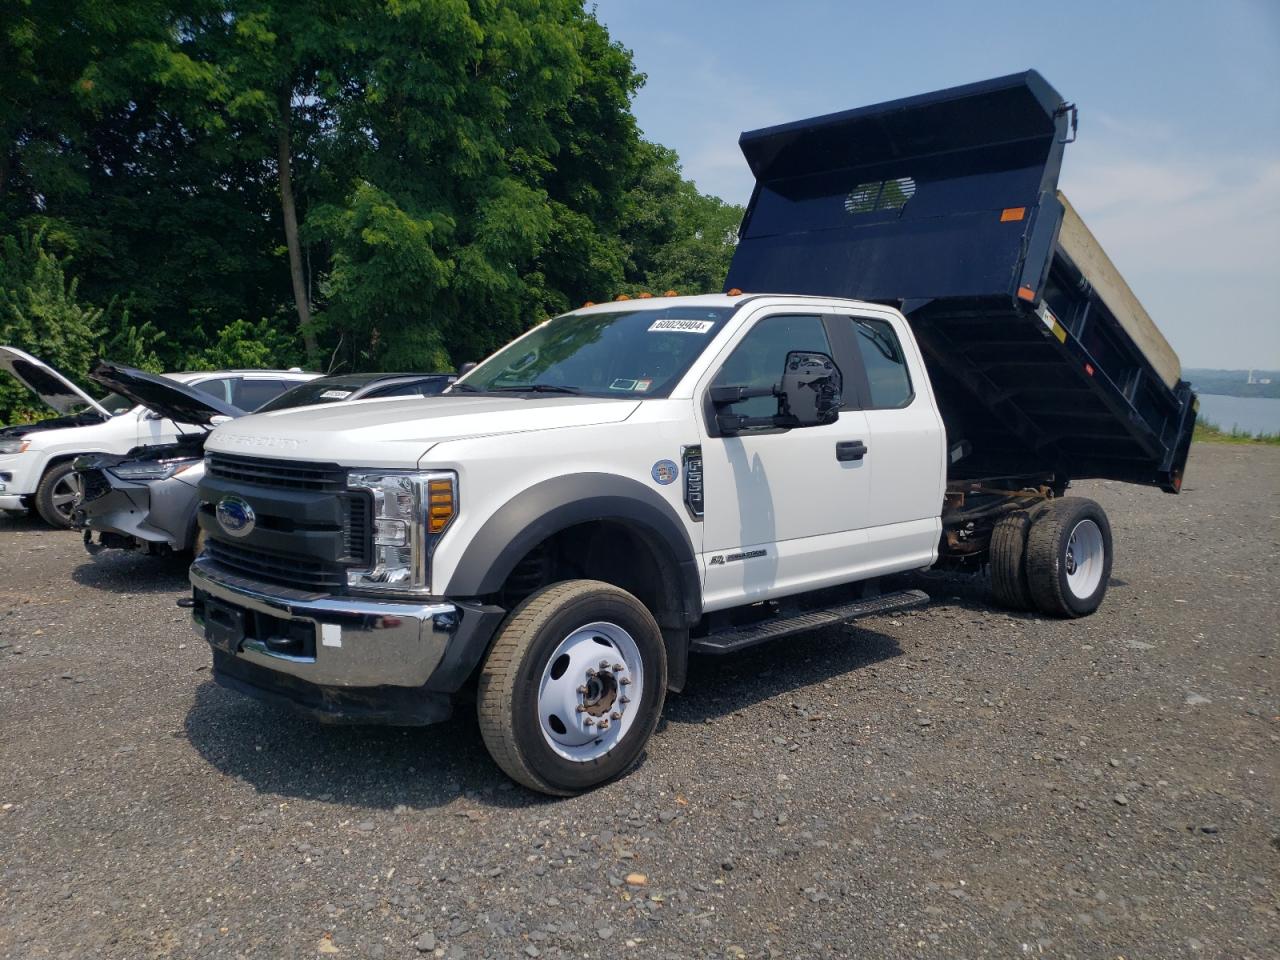 Salvage 2019 Ford F550 